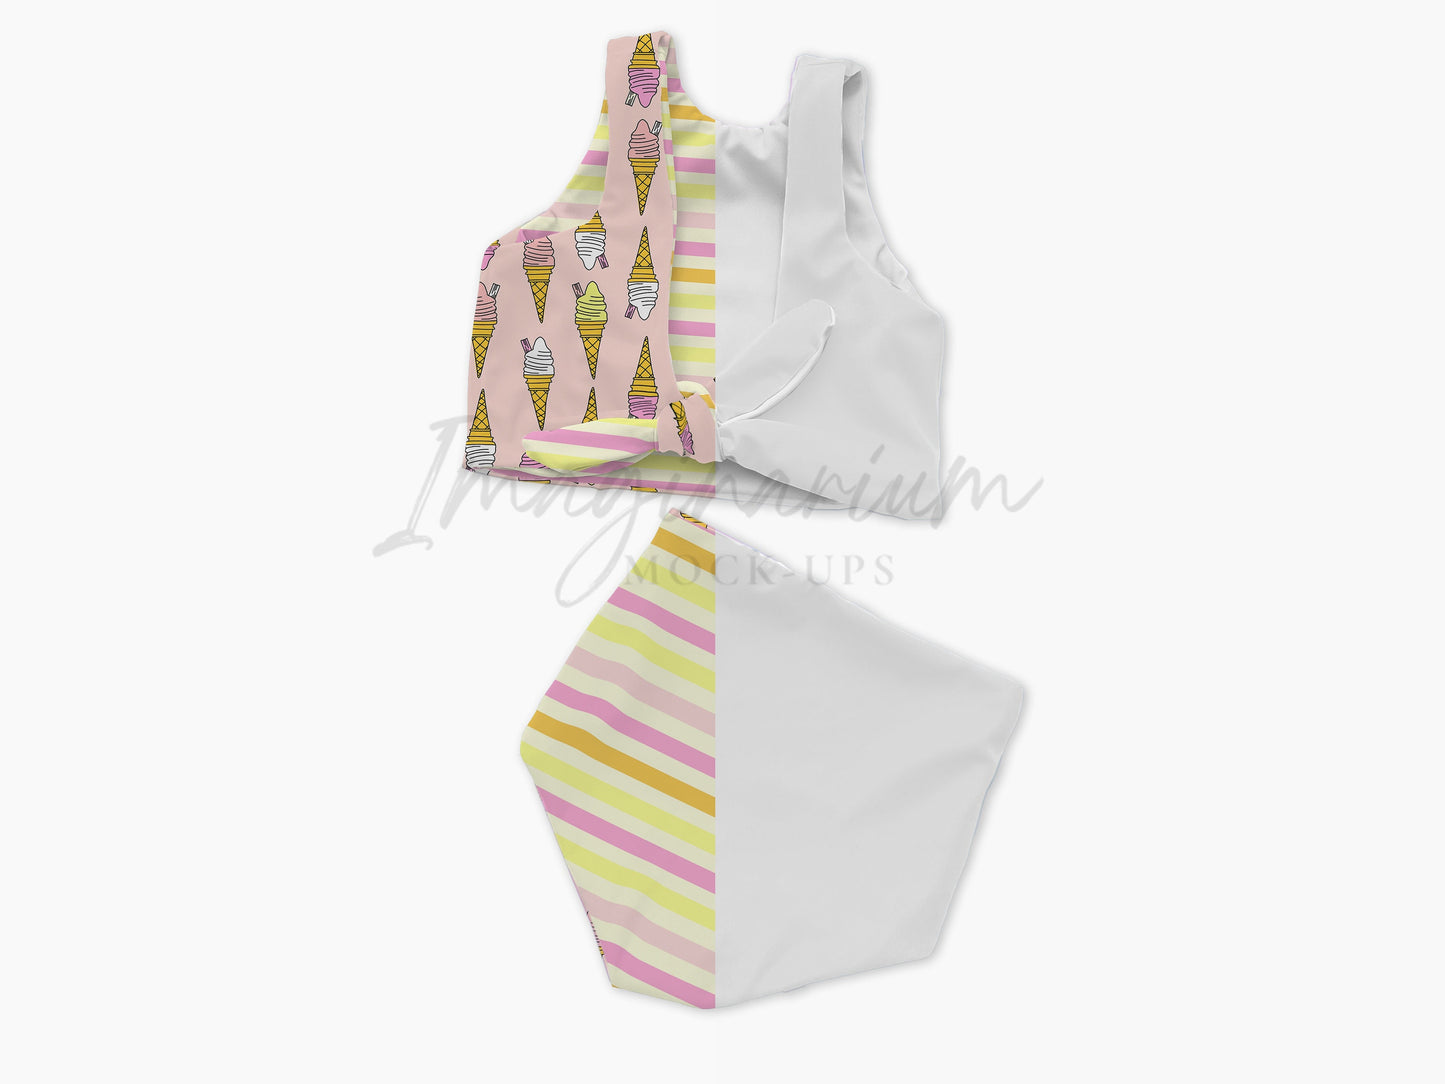 Reversible Two Piece Swimsuit Mock Up, Realistic Clothing Mockup for Photoshop and Procreate